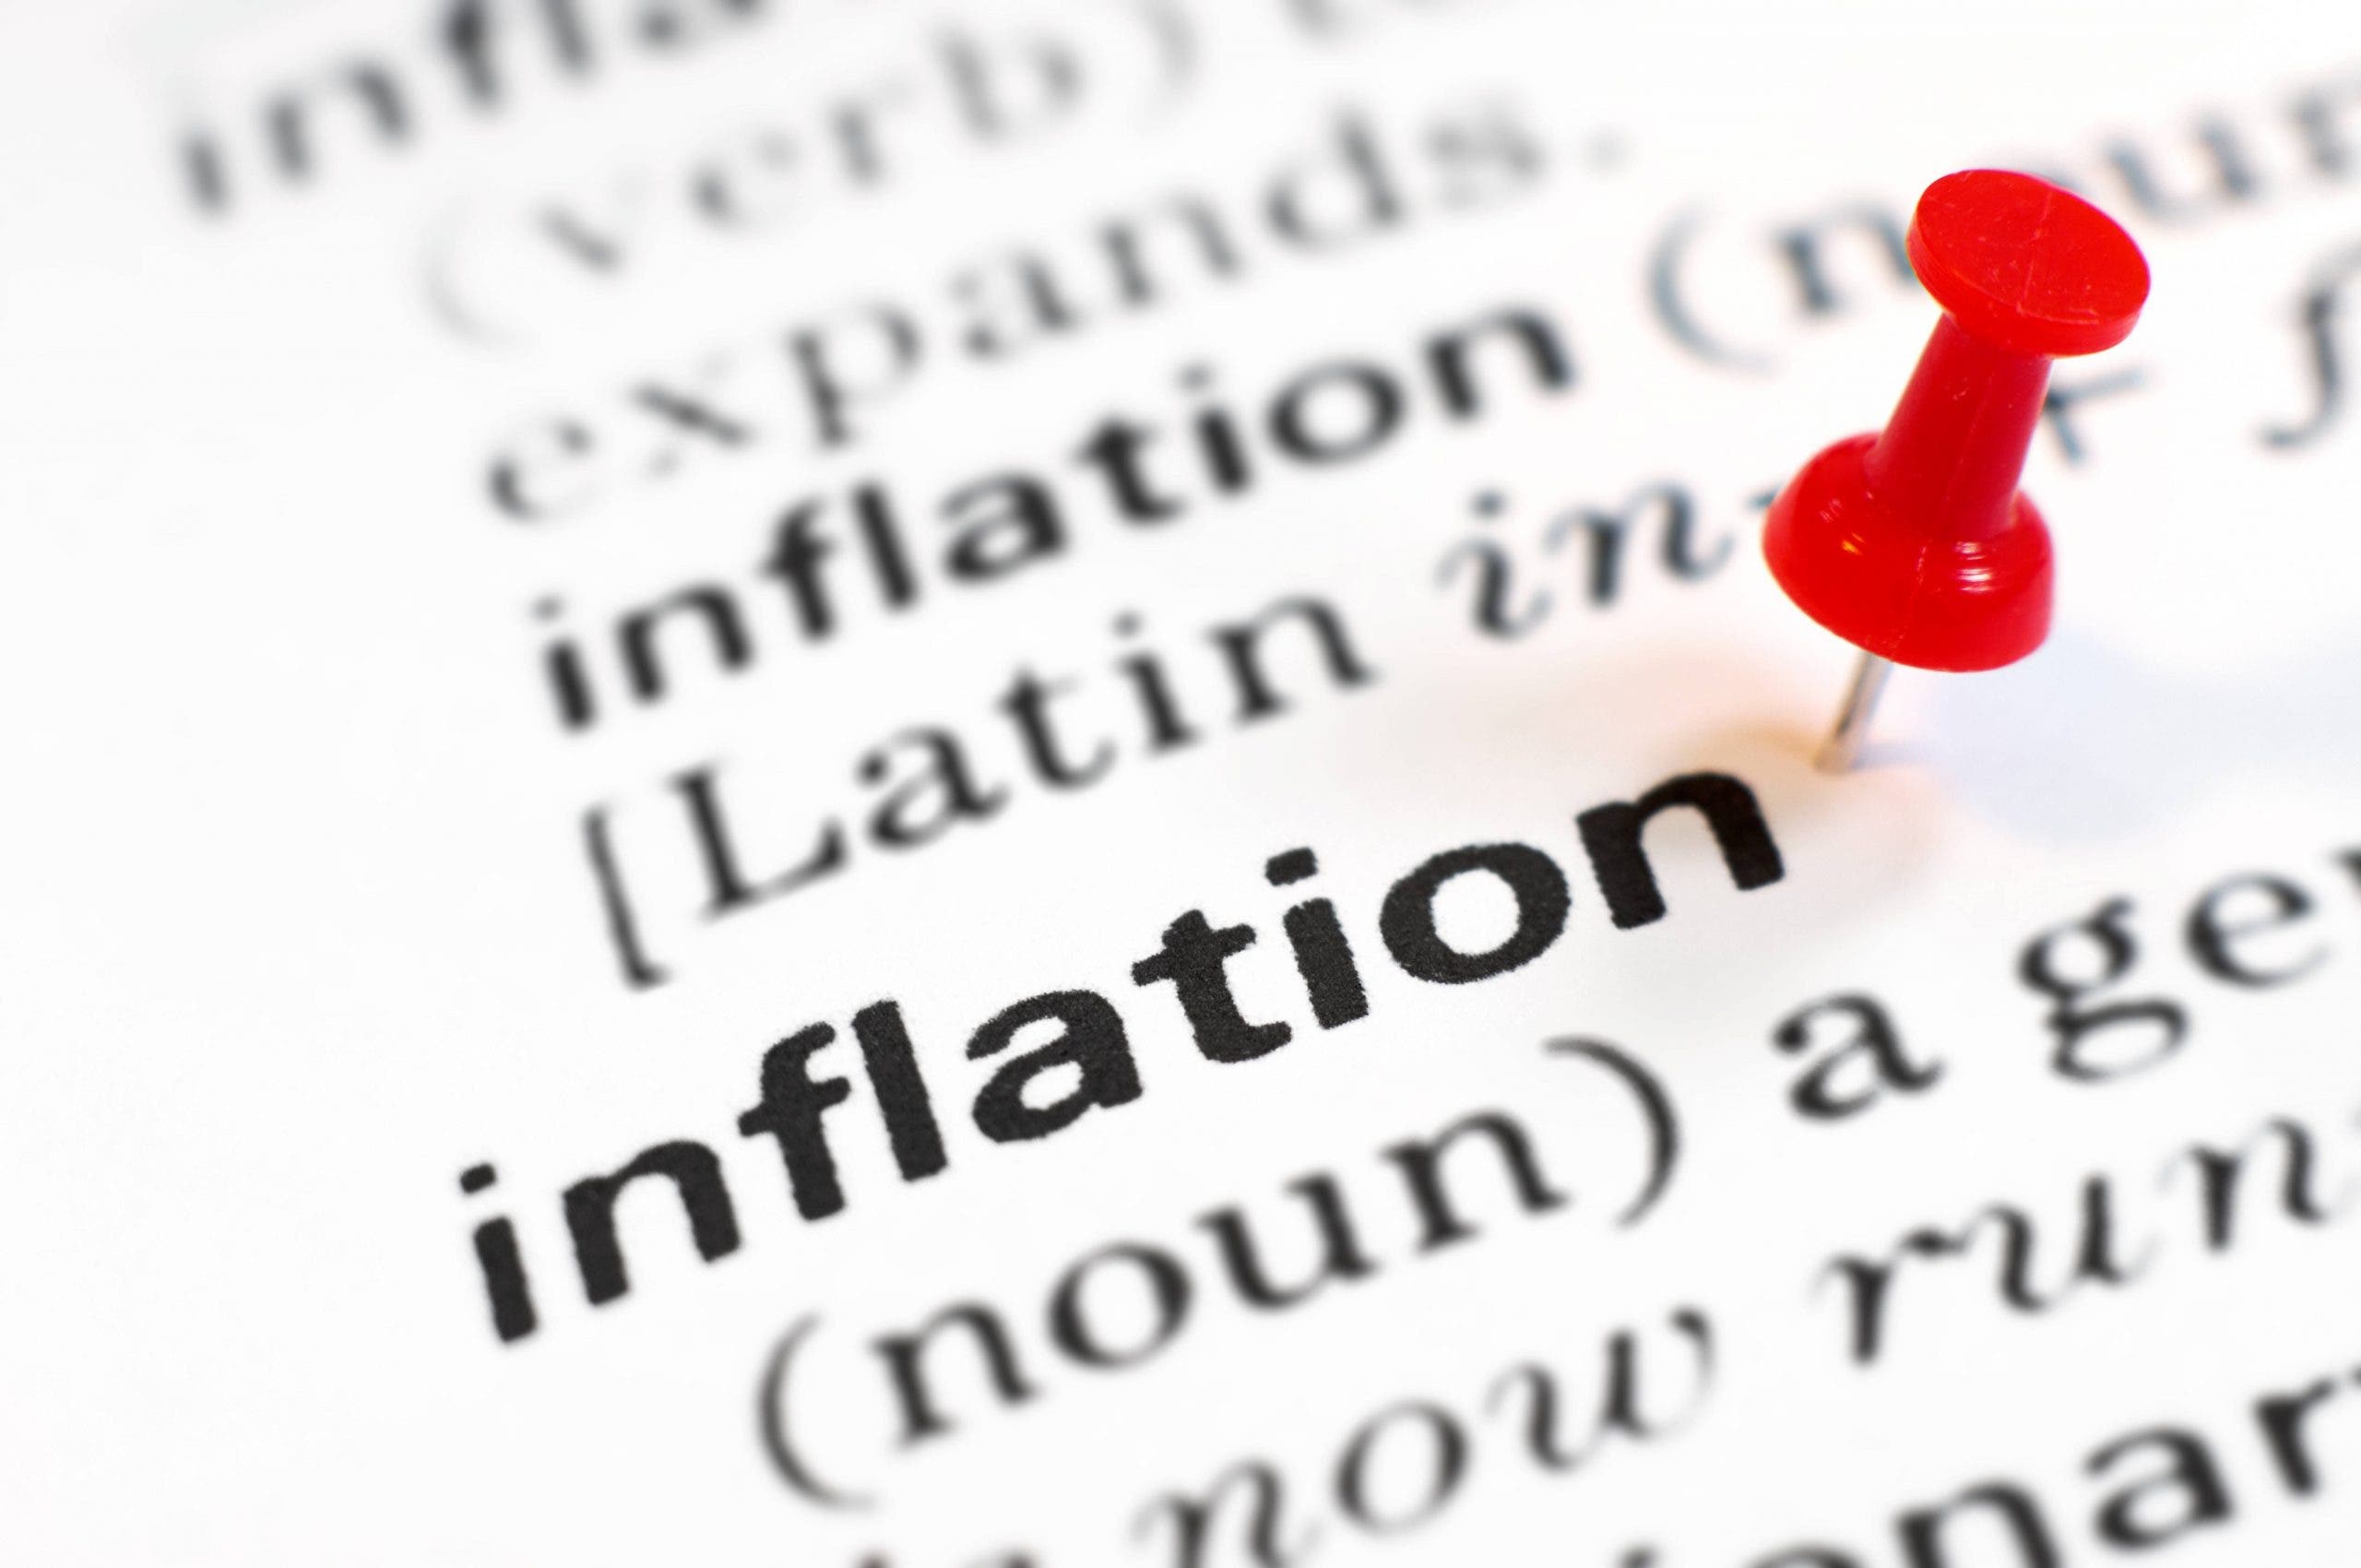 Spains Inflation Rate Falls For First Time Since February 2021 Scaled.jpg